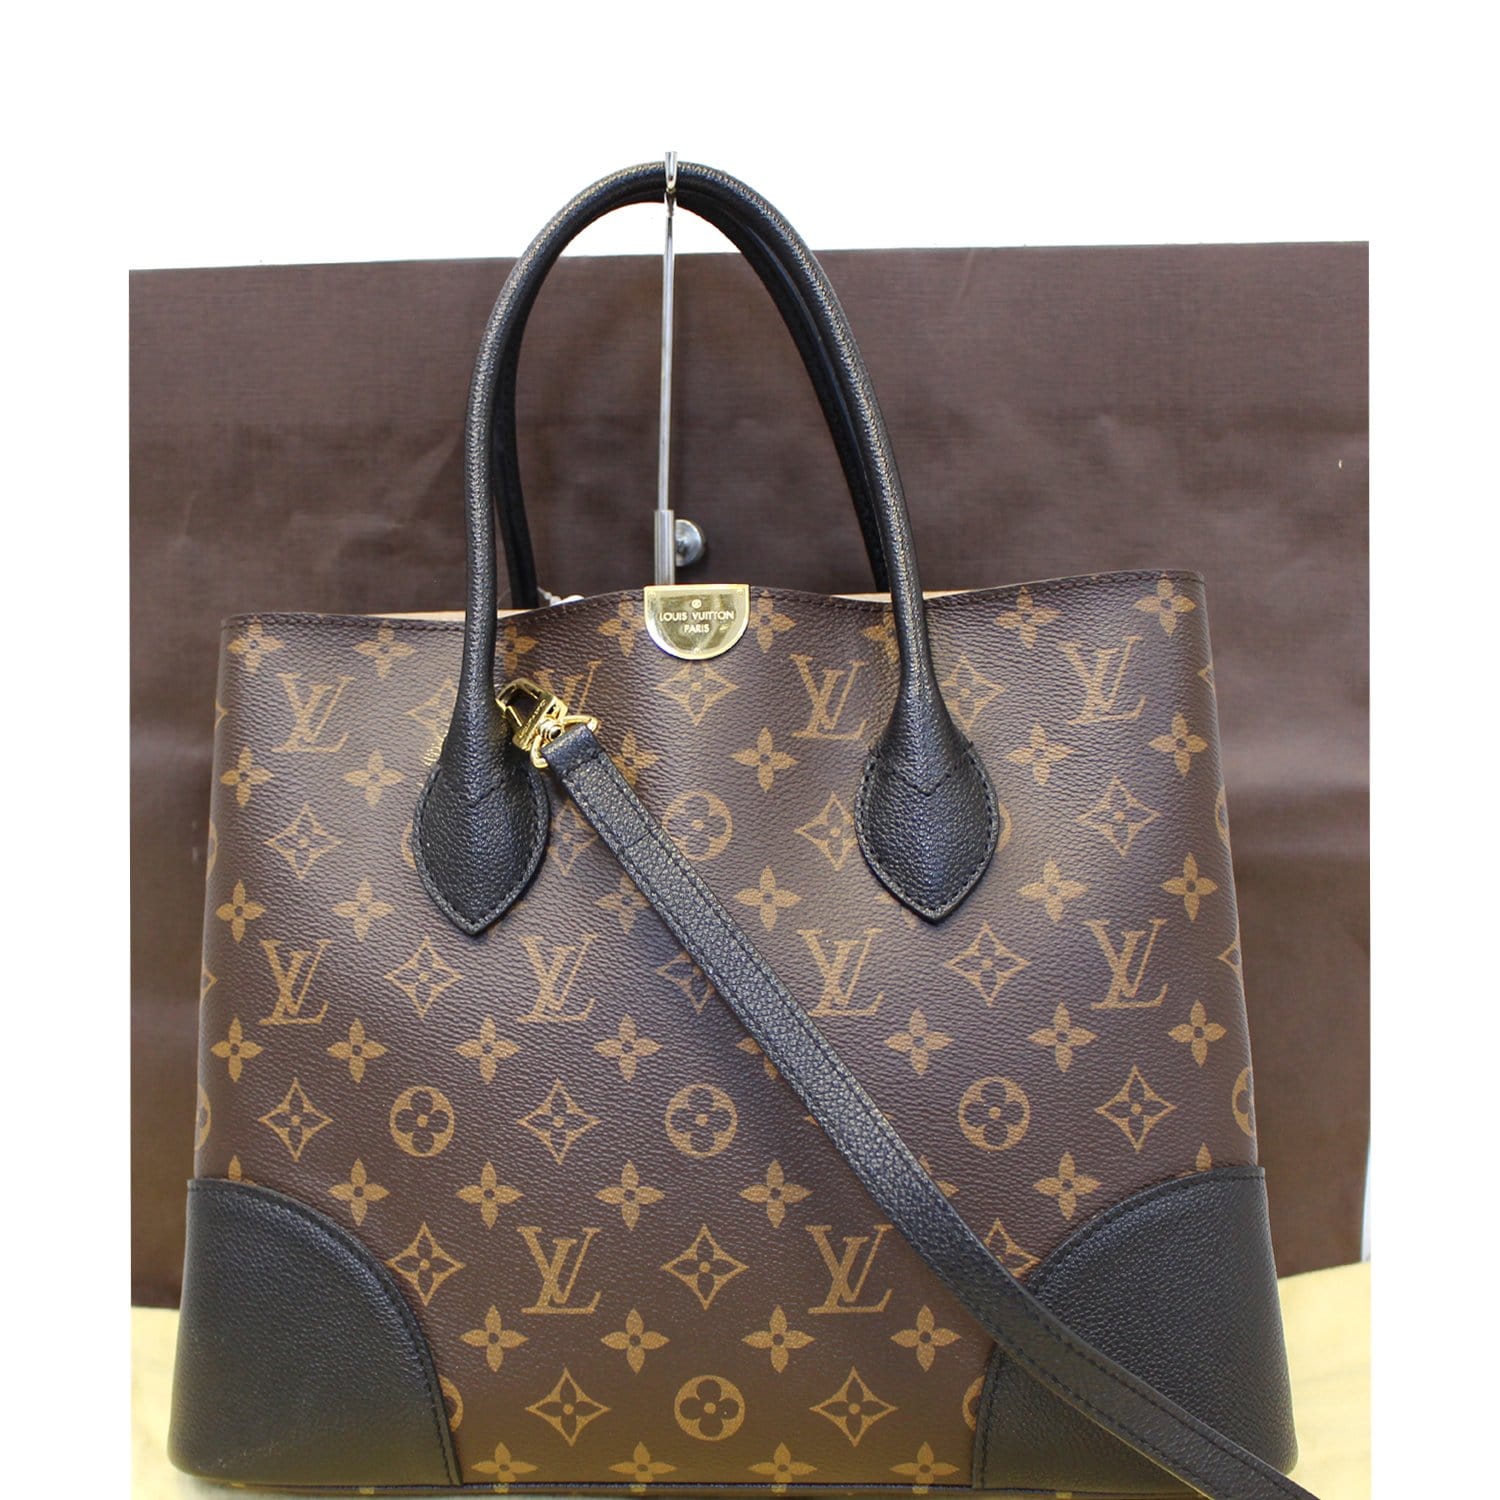 Sell Used Louis Vuitton Purses For Sale | IQS Executive